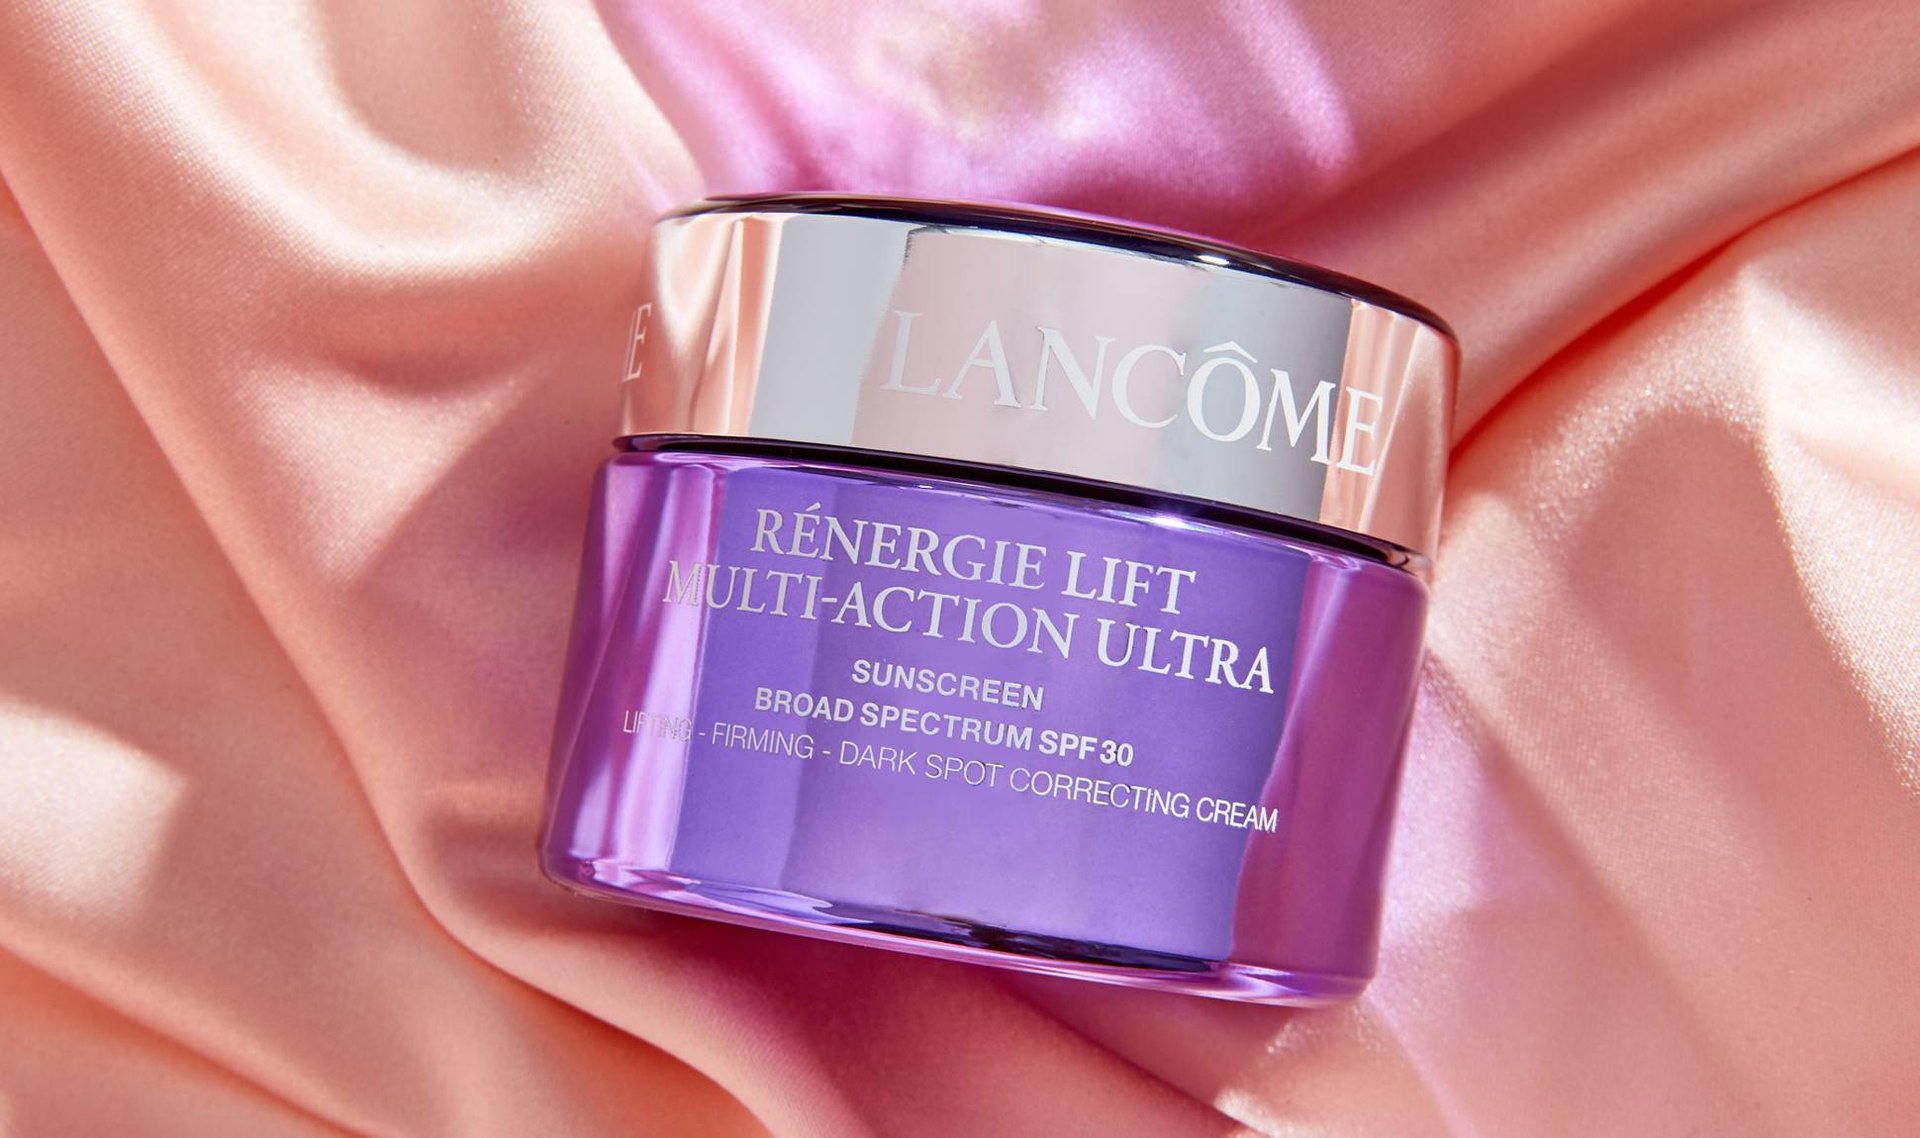 Correct and Prevent Dark Spots With the New Lancôme Rénergie Lift Multi-Action Ultra Cream